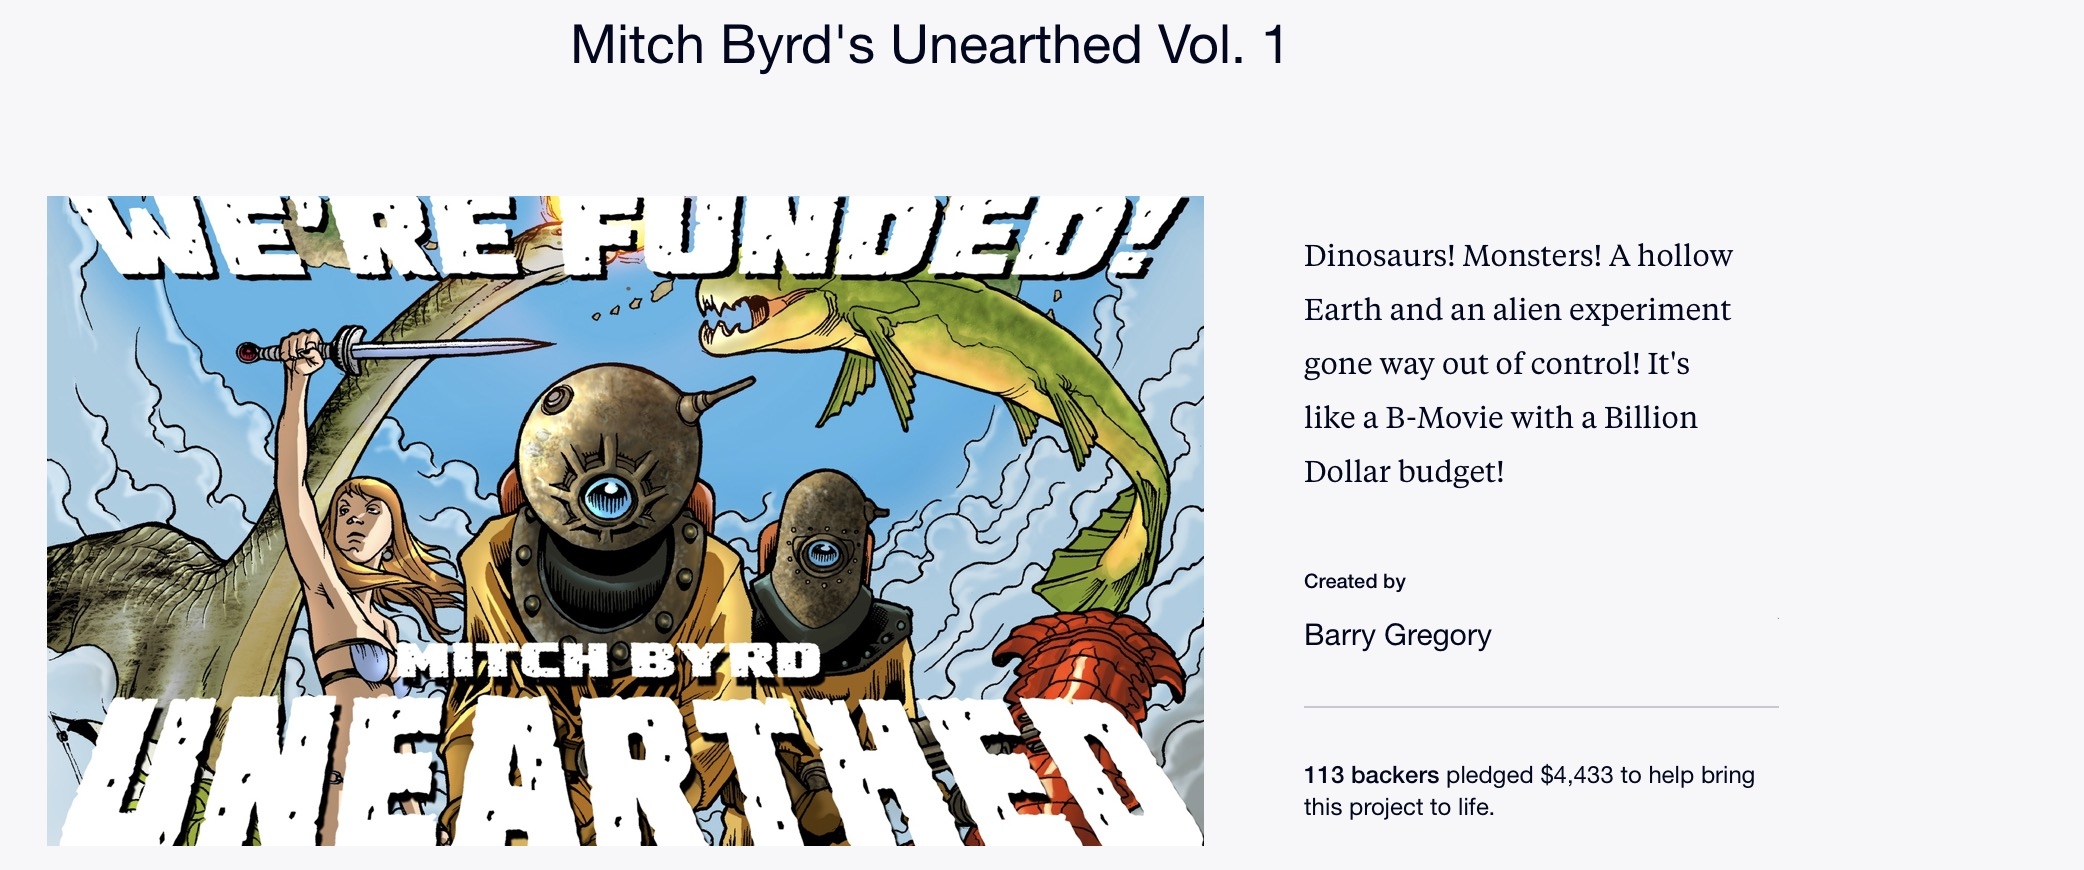 Mitch Byrd’s Unearthed Vol. 1 has LAUNCHED off of Kickstarter